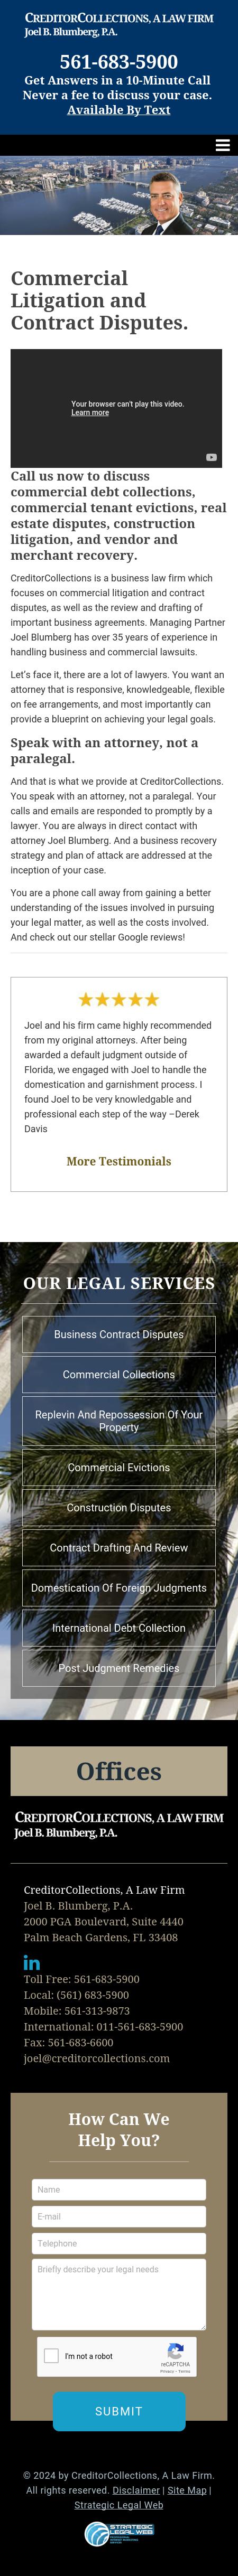 CreditorCollections, A Law Firm - West Palm Beach FL Lawyers